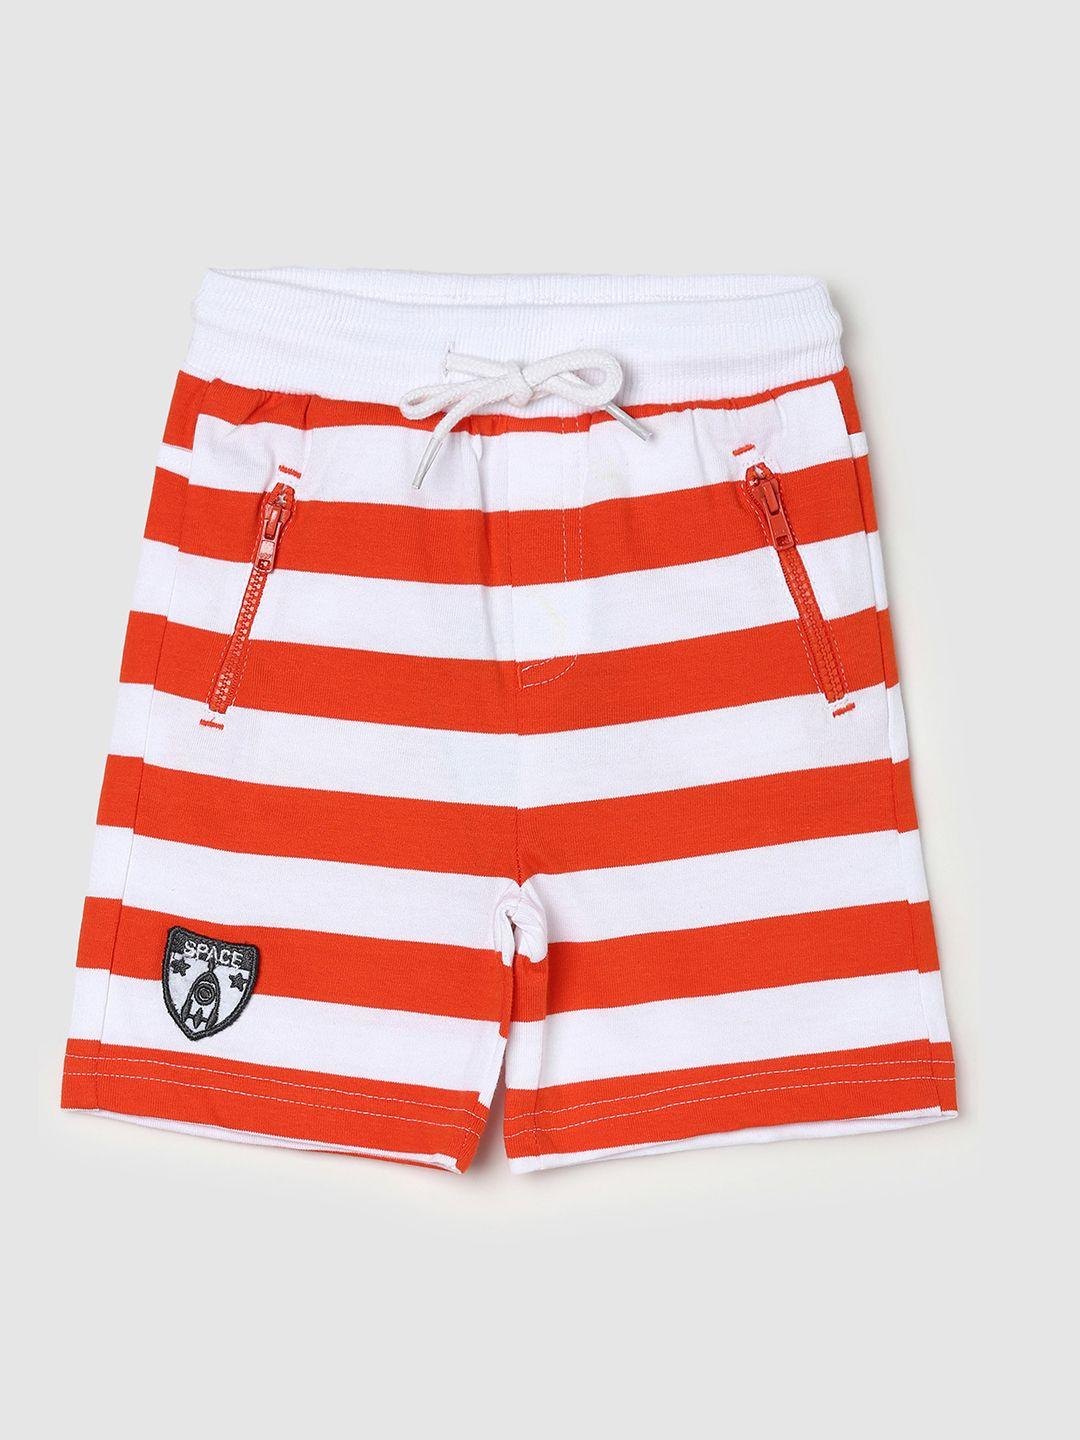 max-boys-red-striped-pure-cotton-shorts